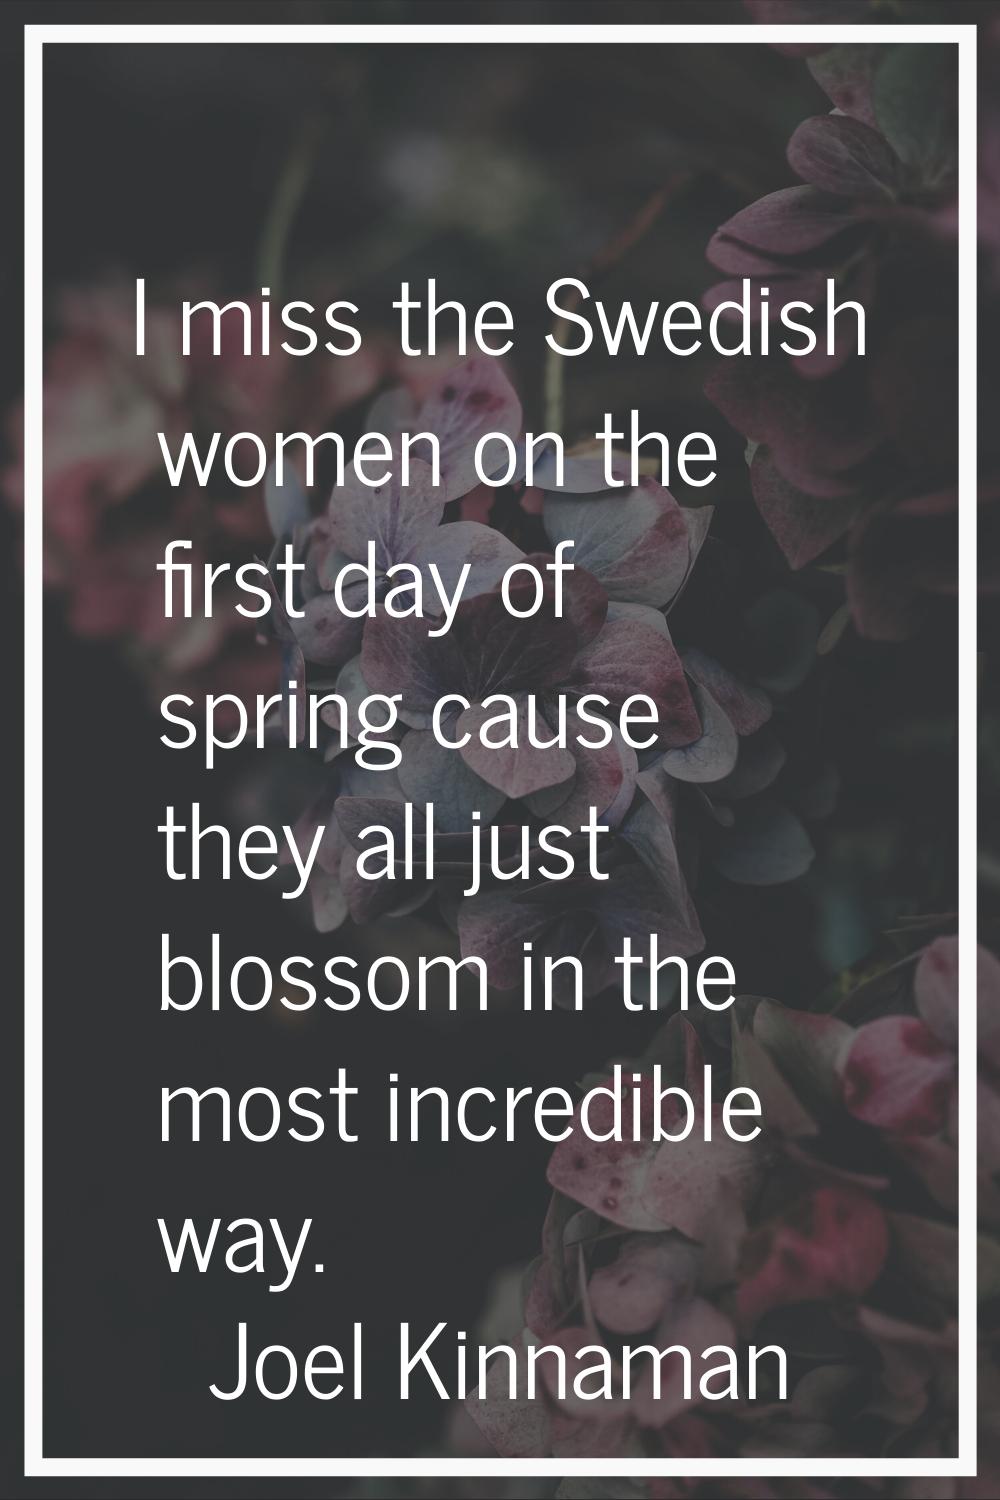 I miss the Swedish women on the first day of spring cause they all just blossom in the most incredi